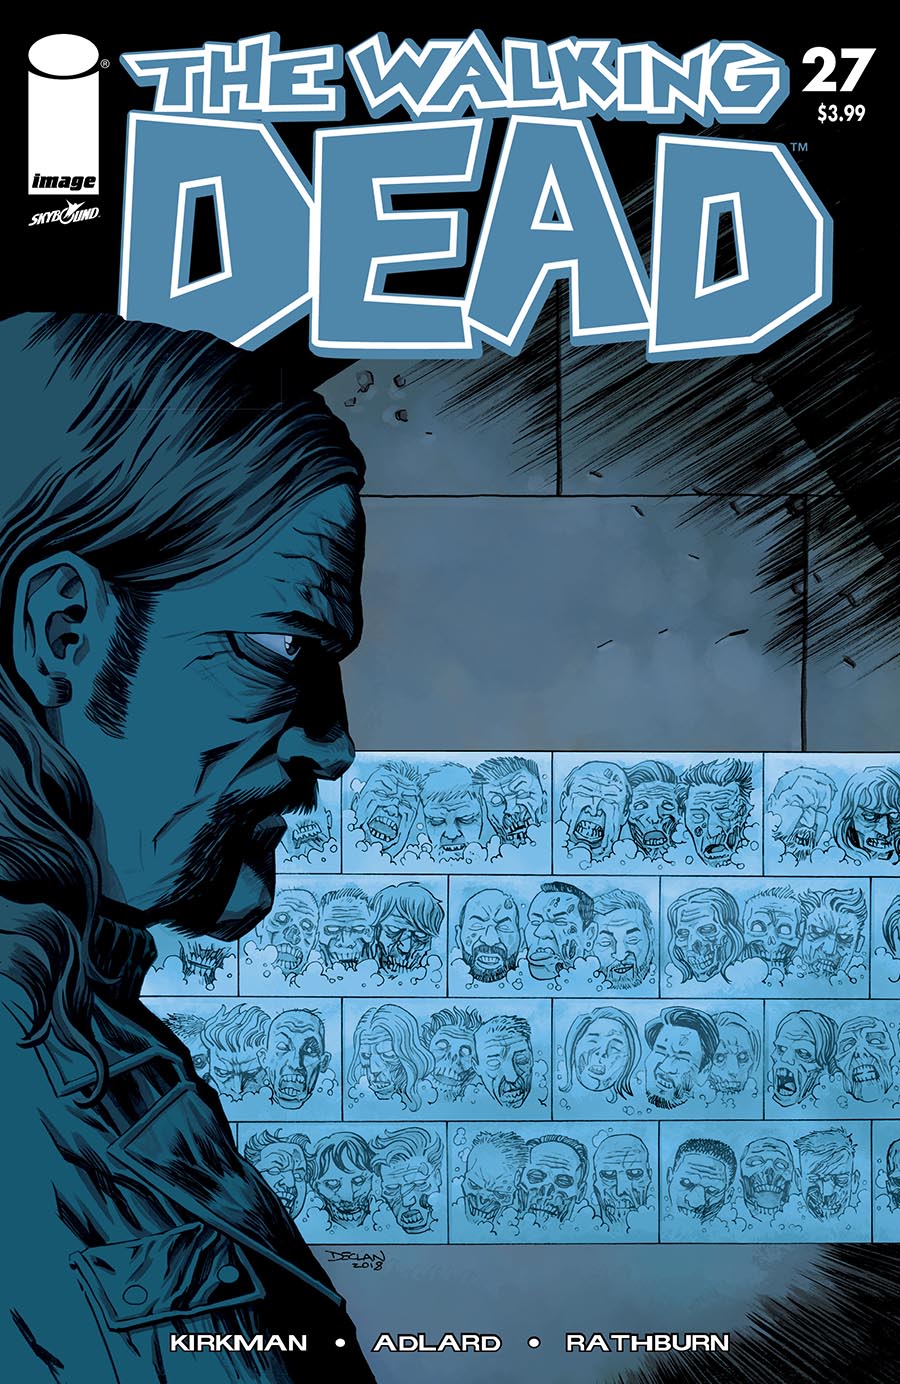 Walking Dead Day Blind Bag Issue 98 Reprint Wes Craig Color Cover 